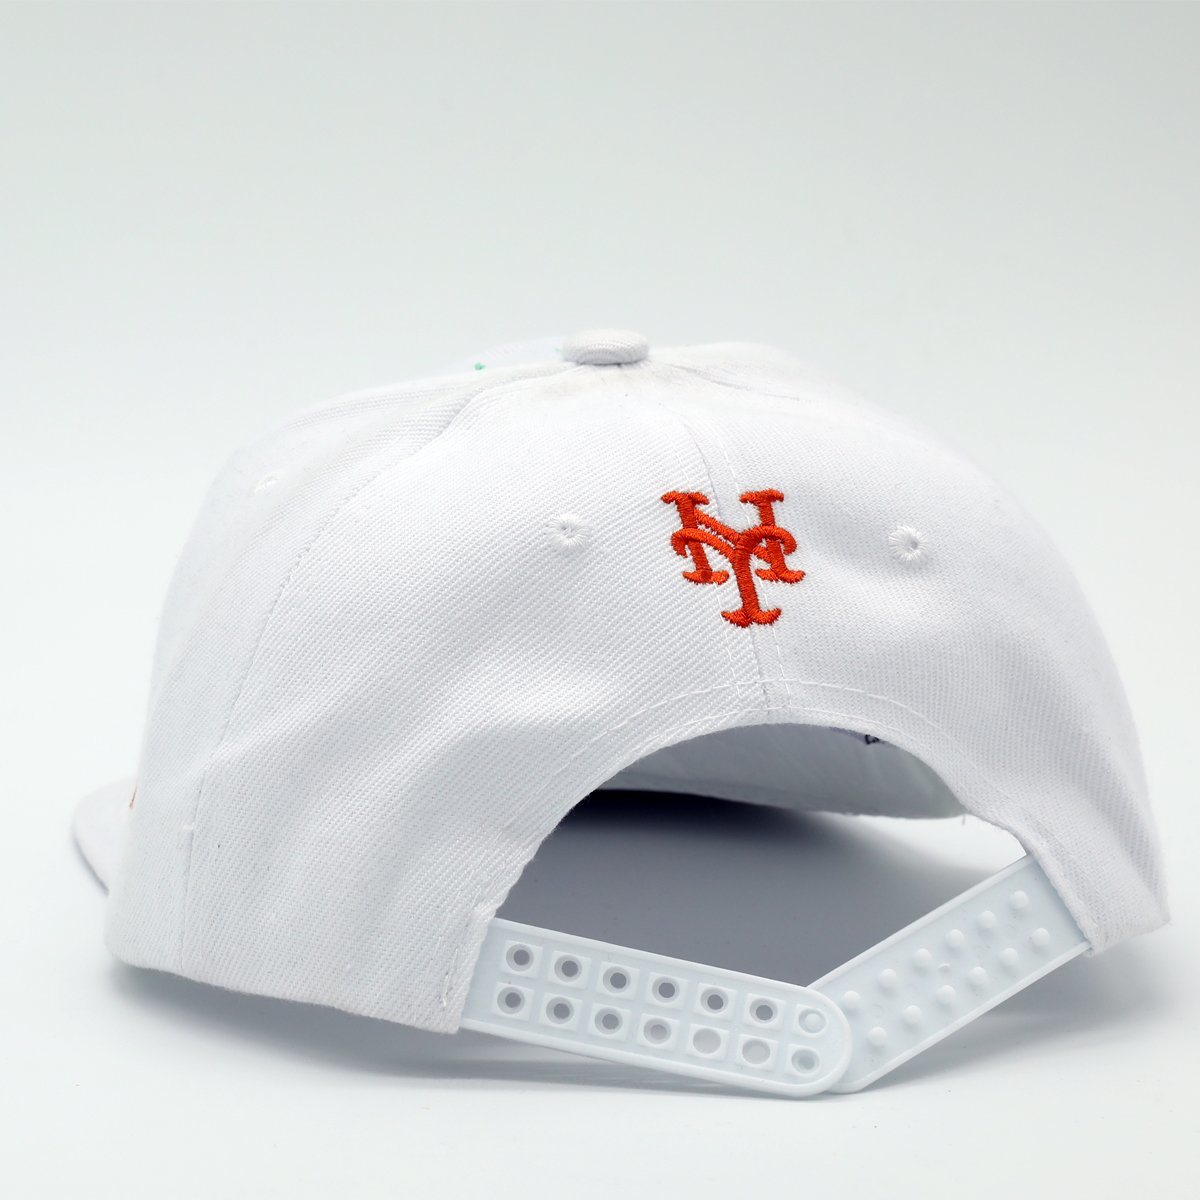 New White Snapback Flat Brim Hat with Embroidery